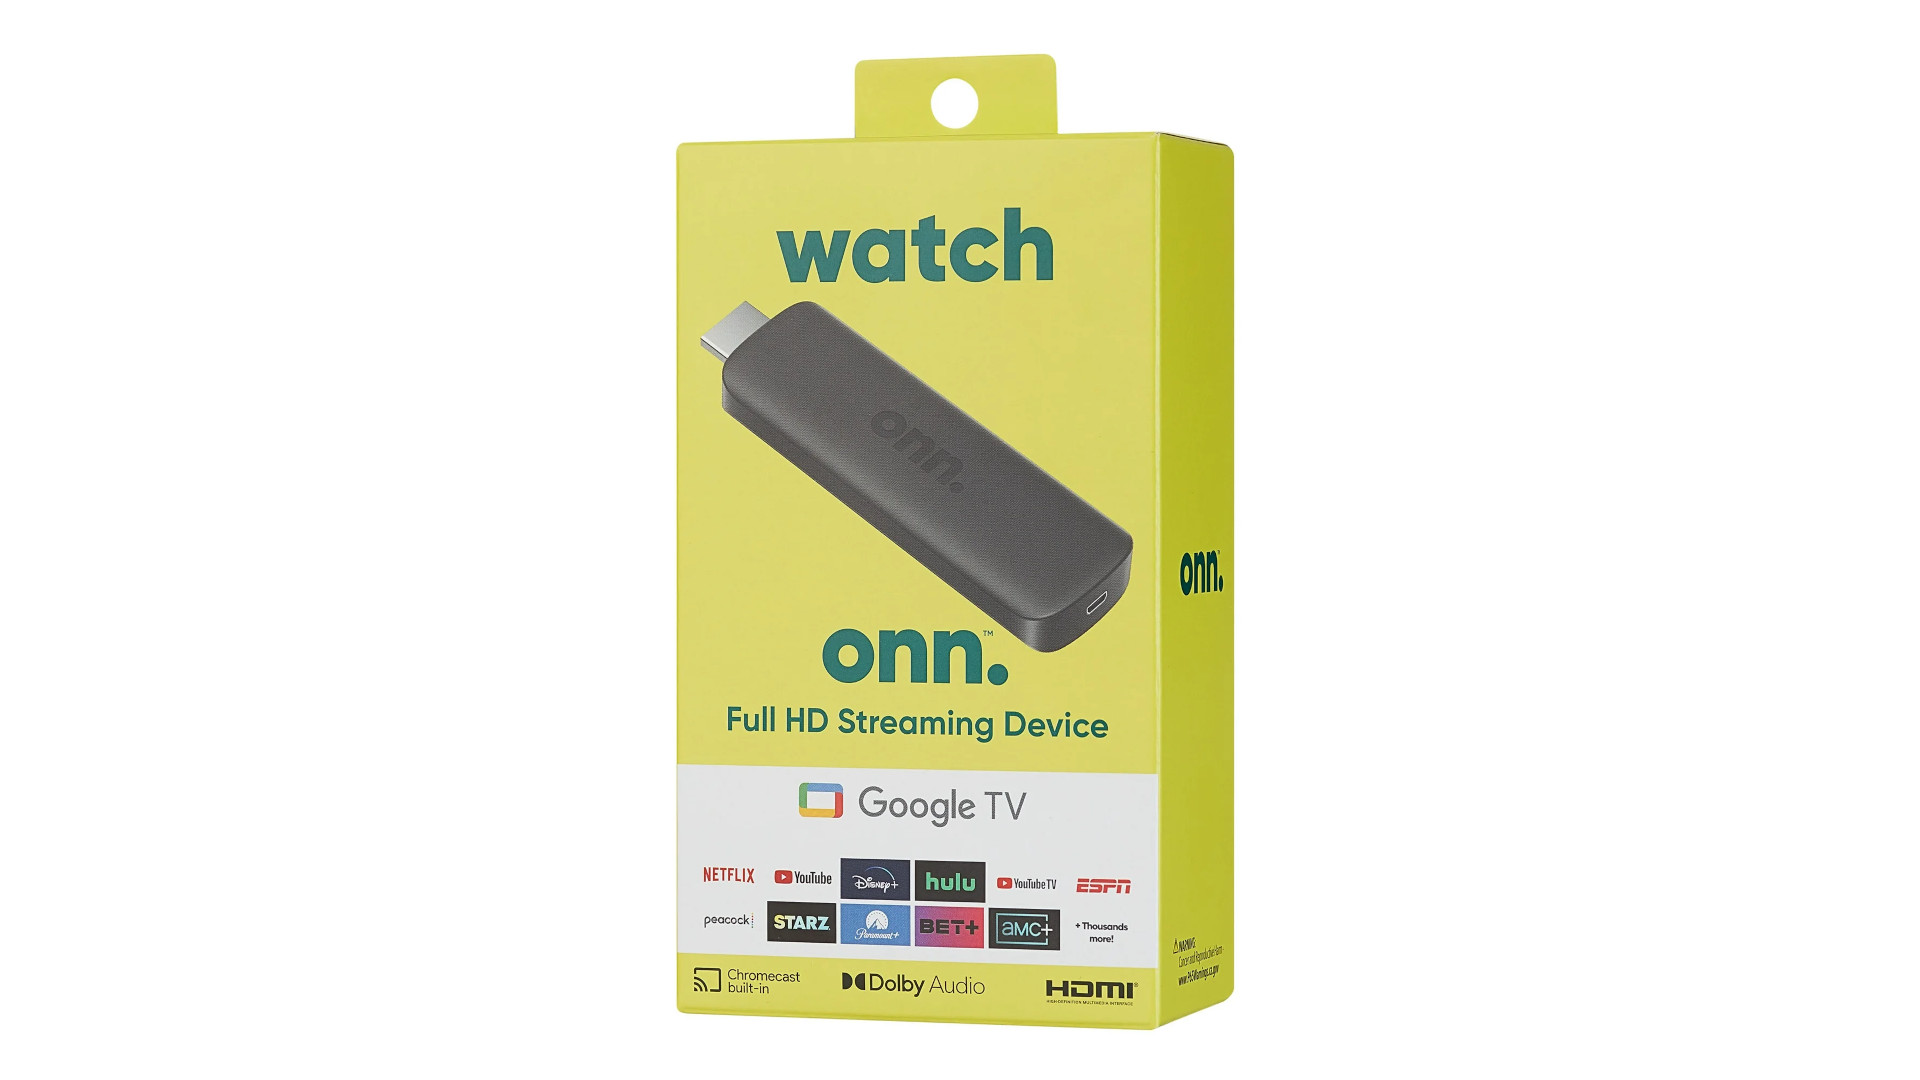 The Walmart Onn Full HD Streaming Device with Google TV.